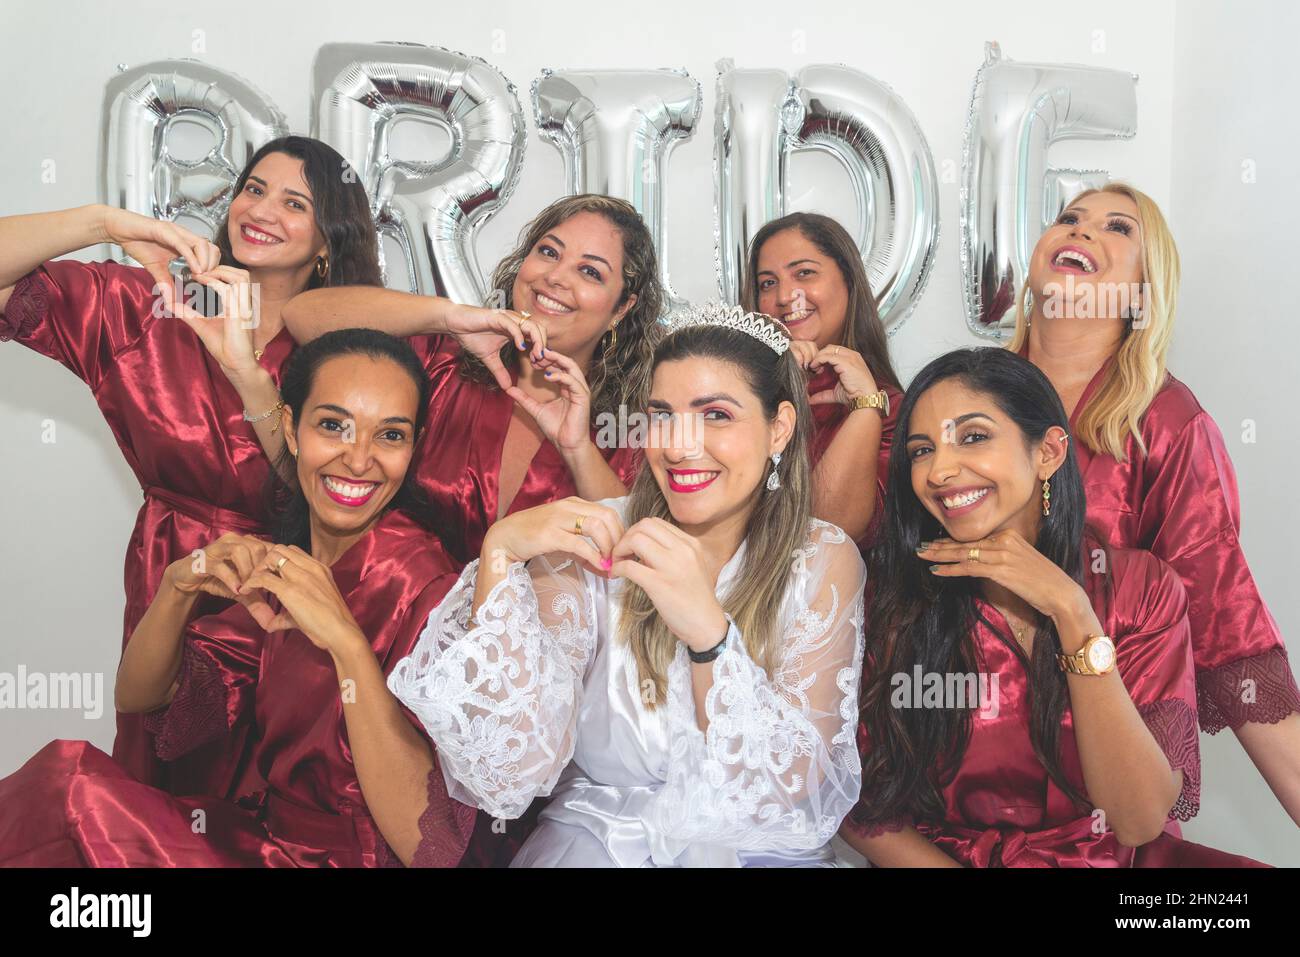 Bride and bridesmaids together in portrait against white background written Bride. Salvador, Bahia, Brazil. Stock Photo